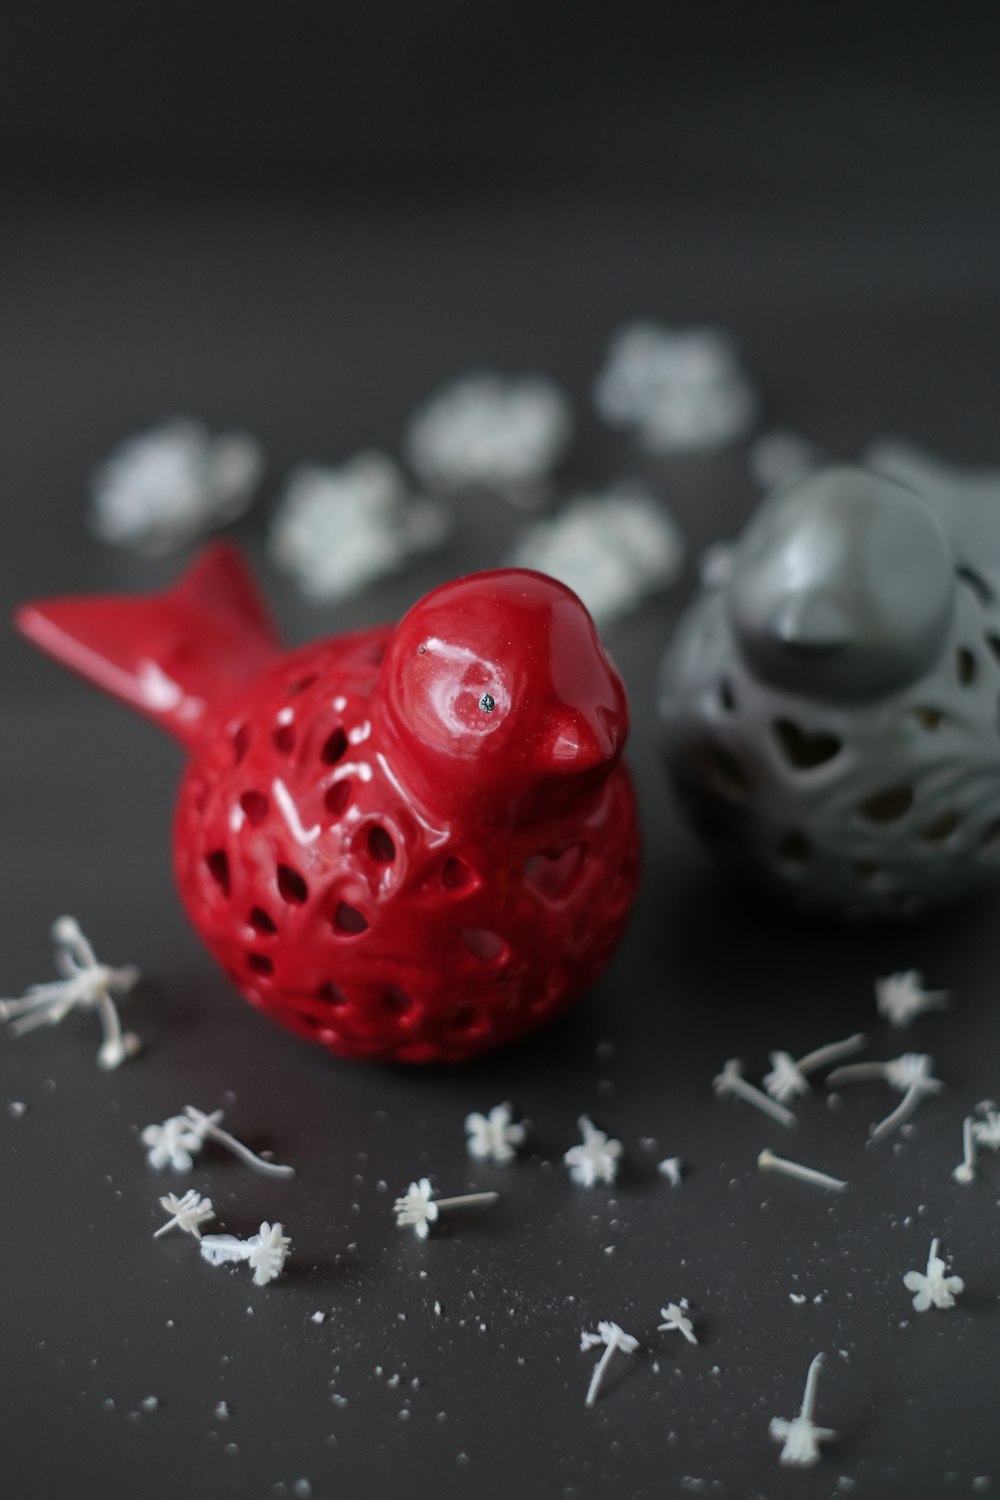 two gray and red bird figurines on gray surface